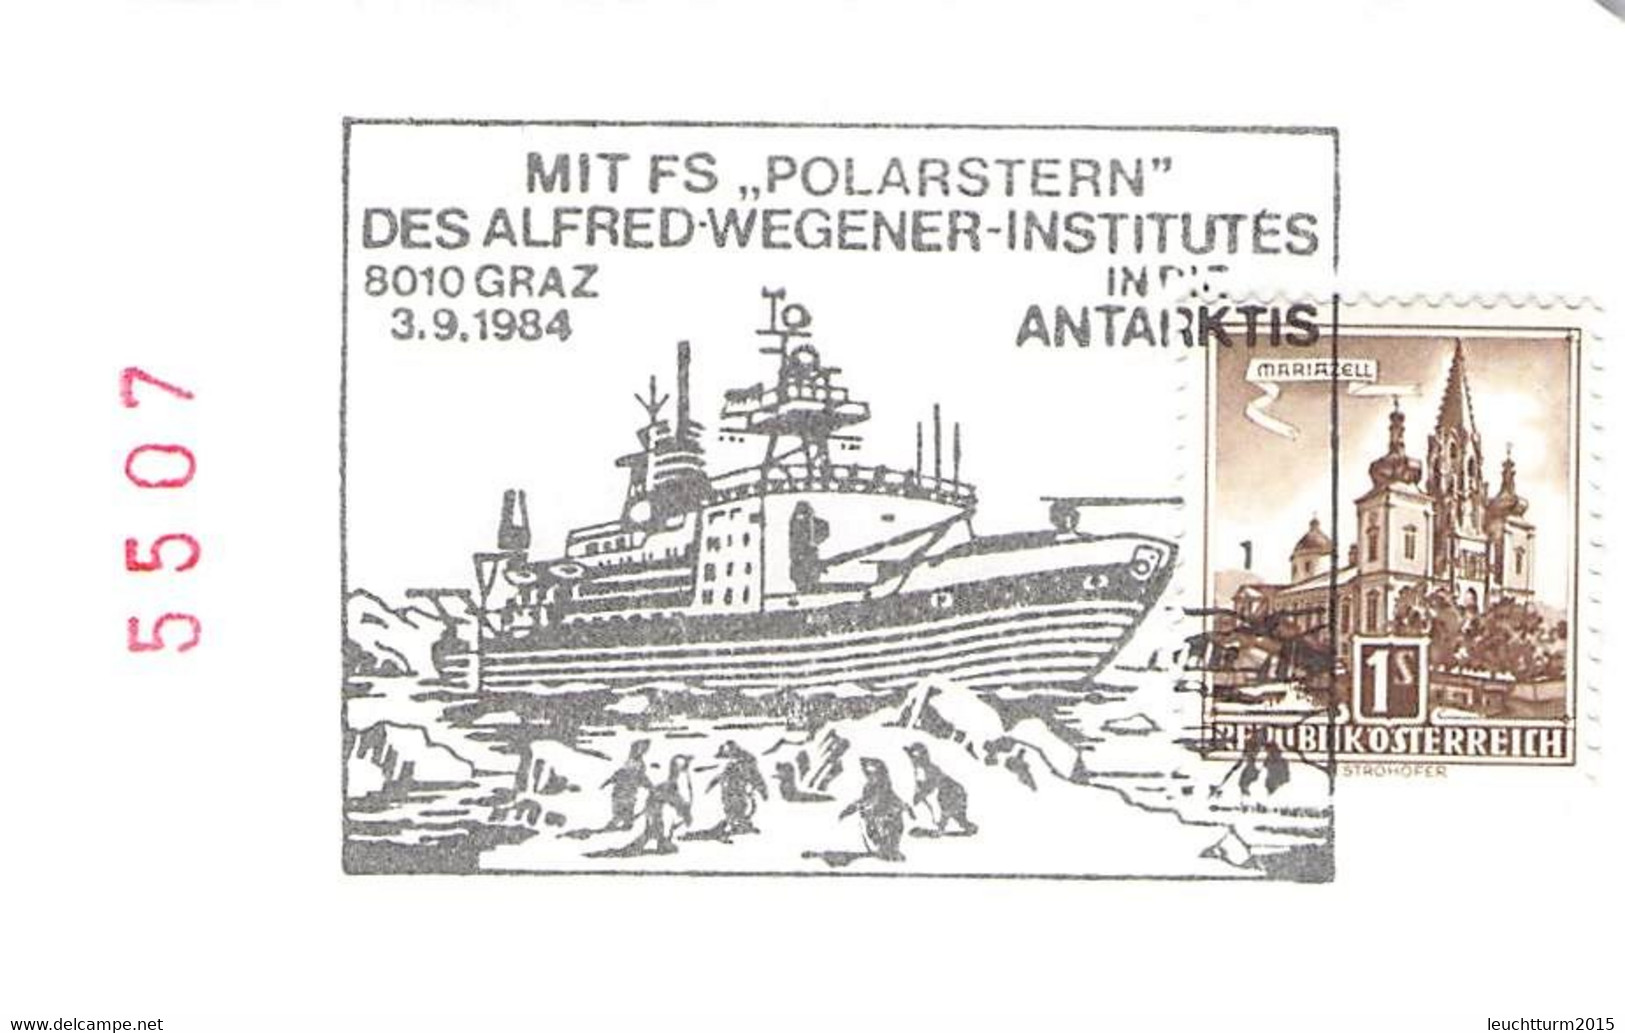 ARCTIS/ANTARCTIC - SMALL COLLECTION COVERS, FDC / QG104